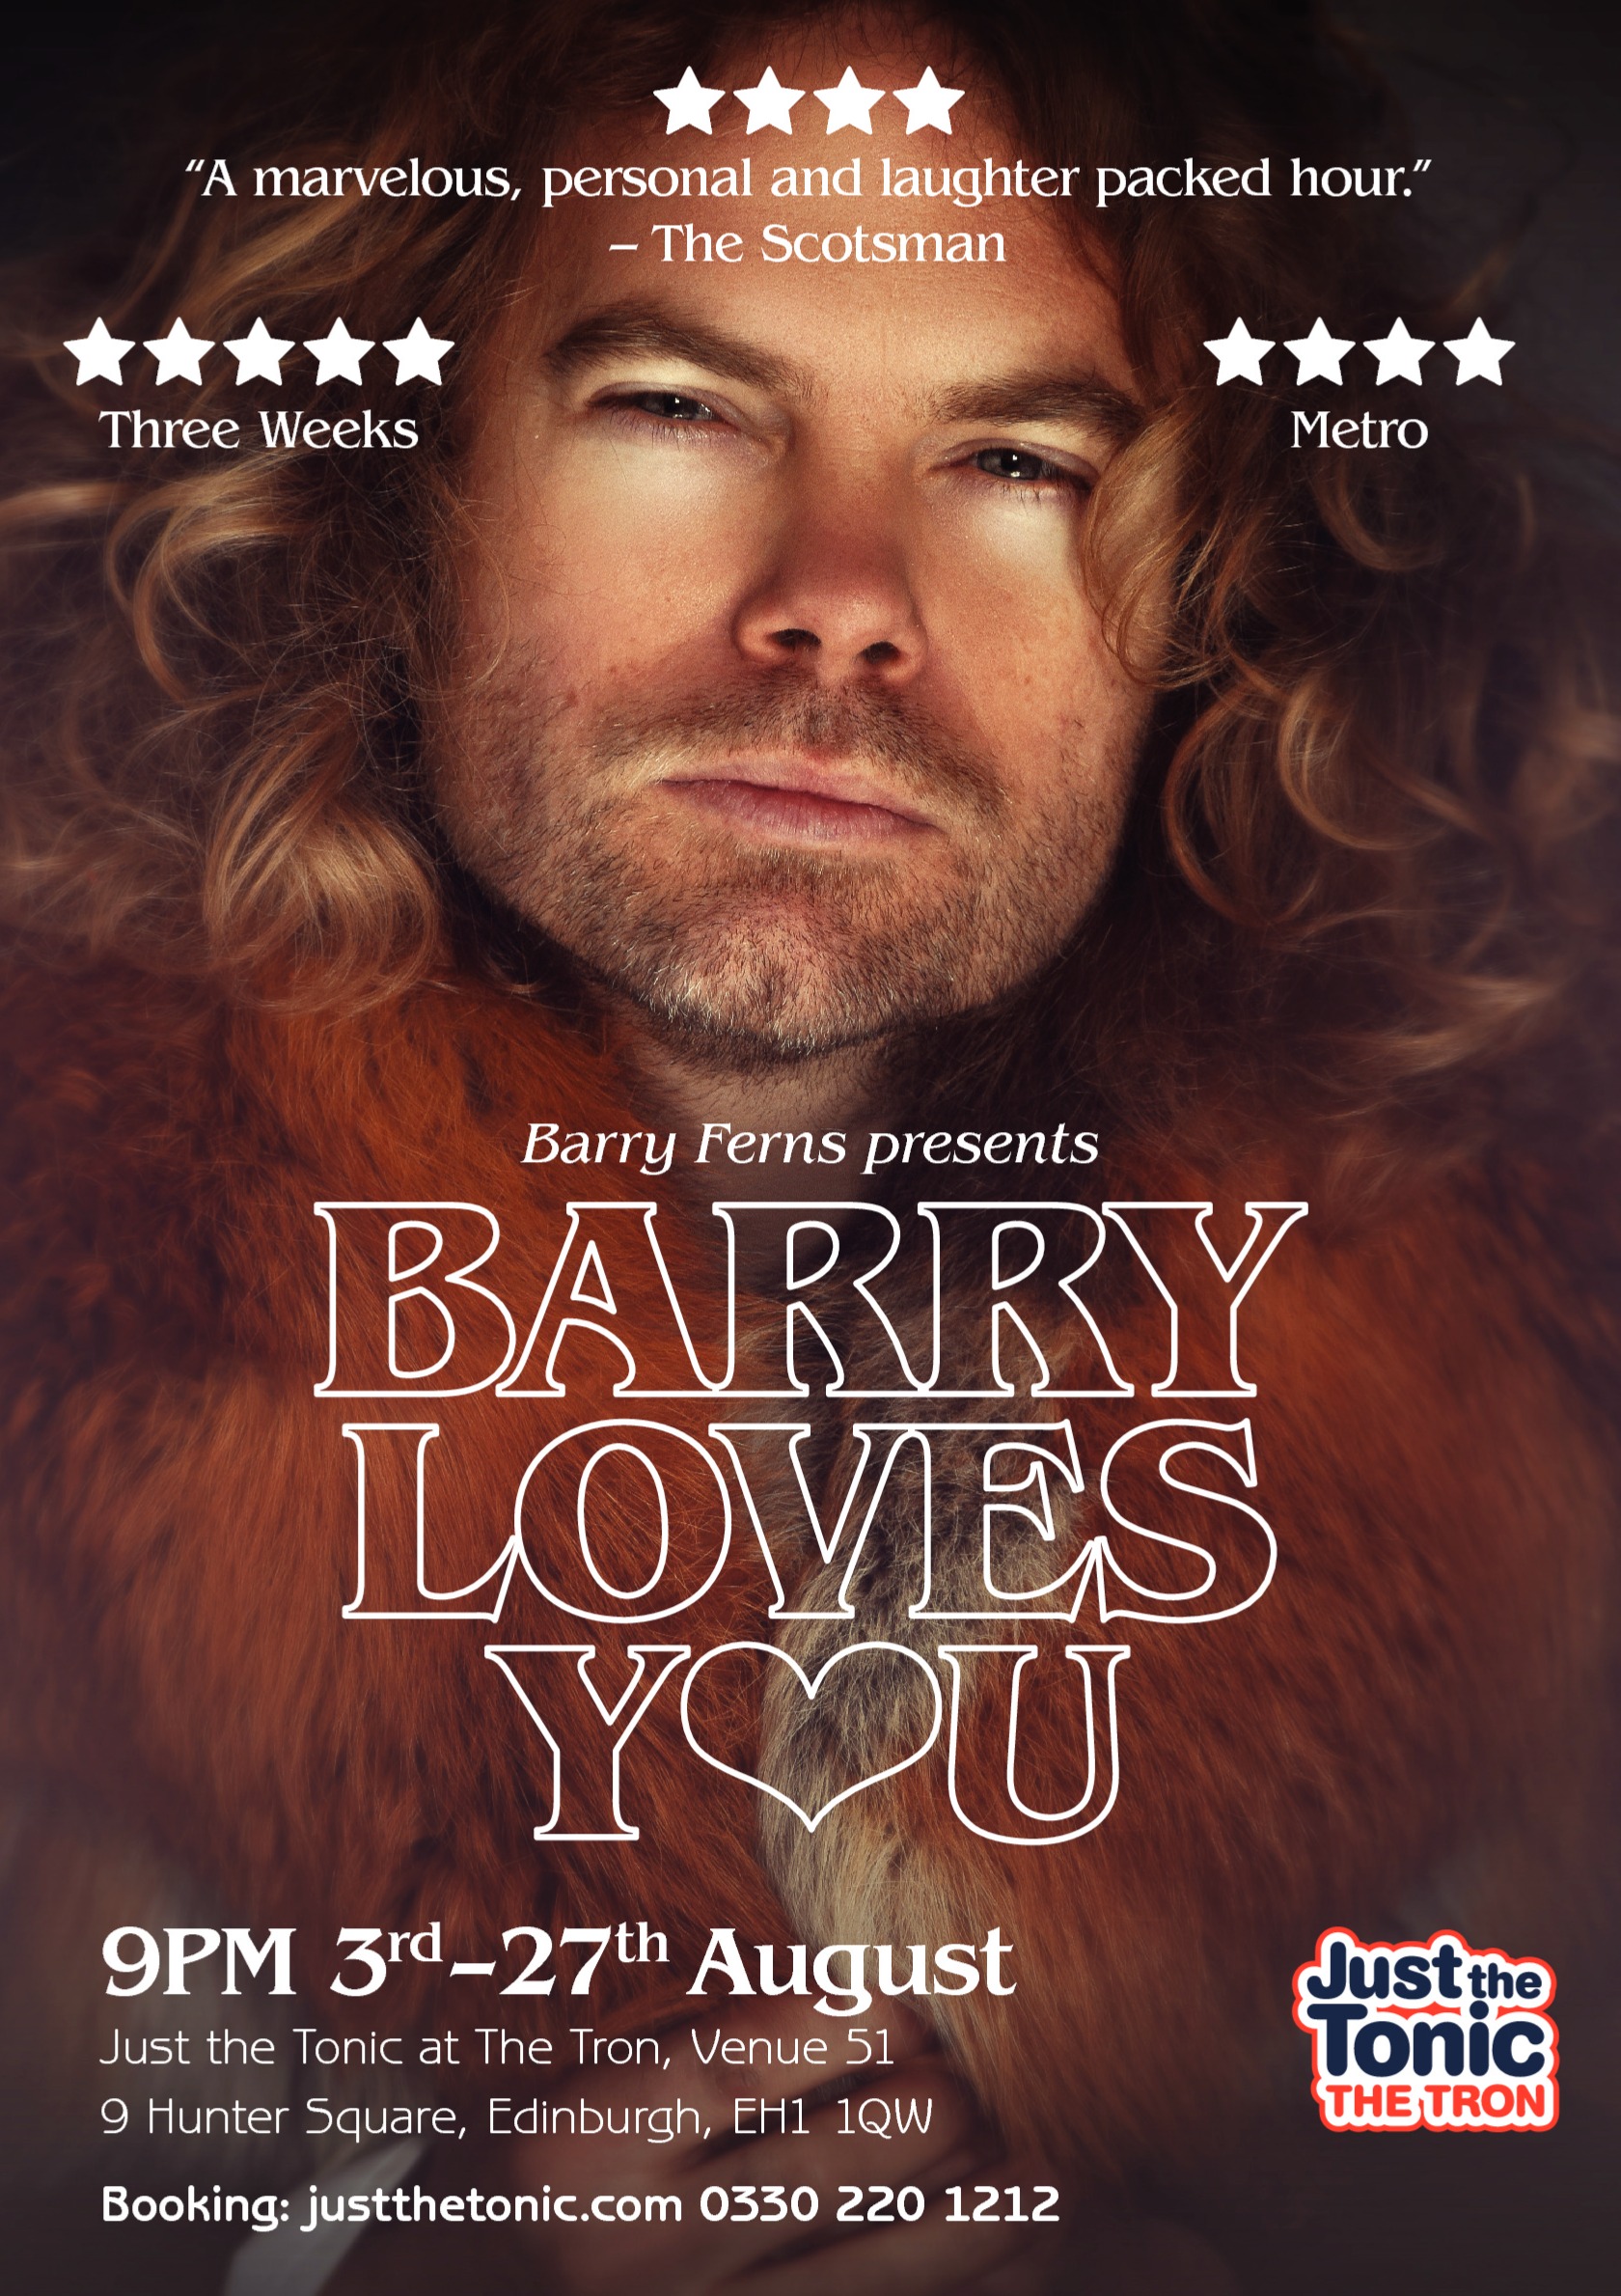 The poster for Barry Ferns: Barry Loves You